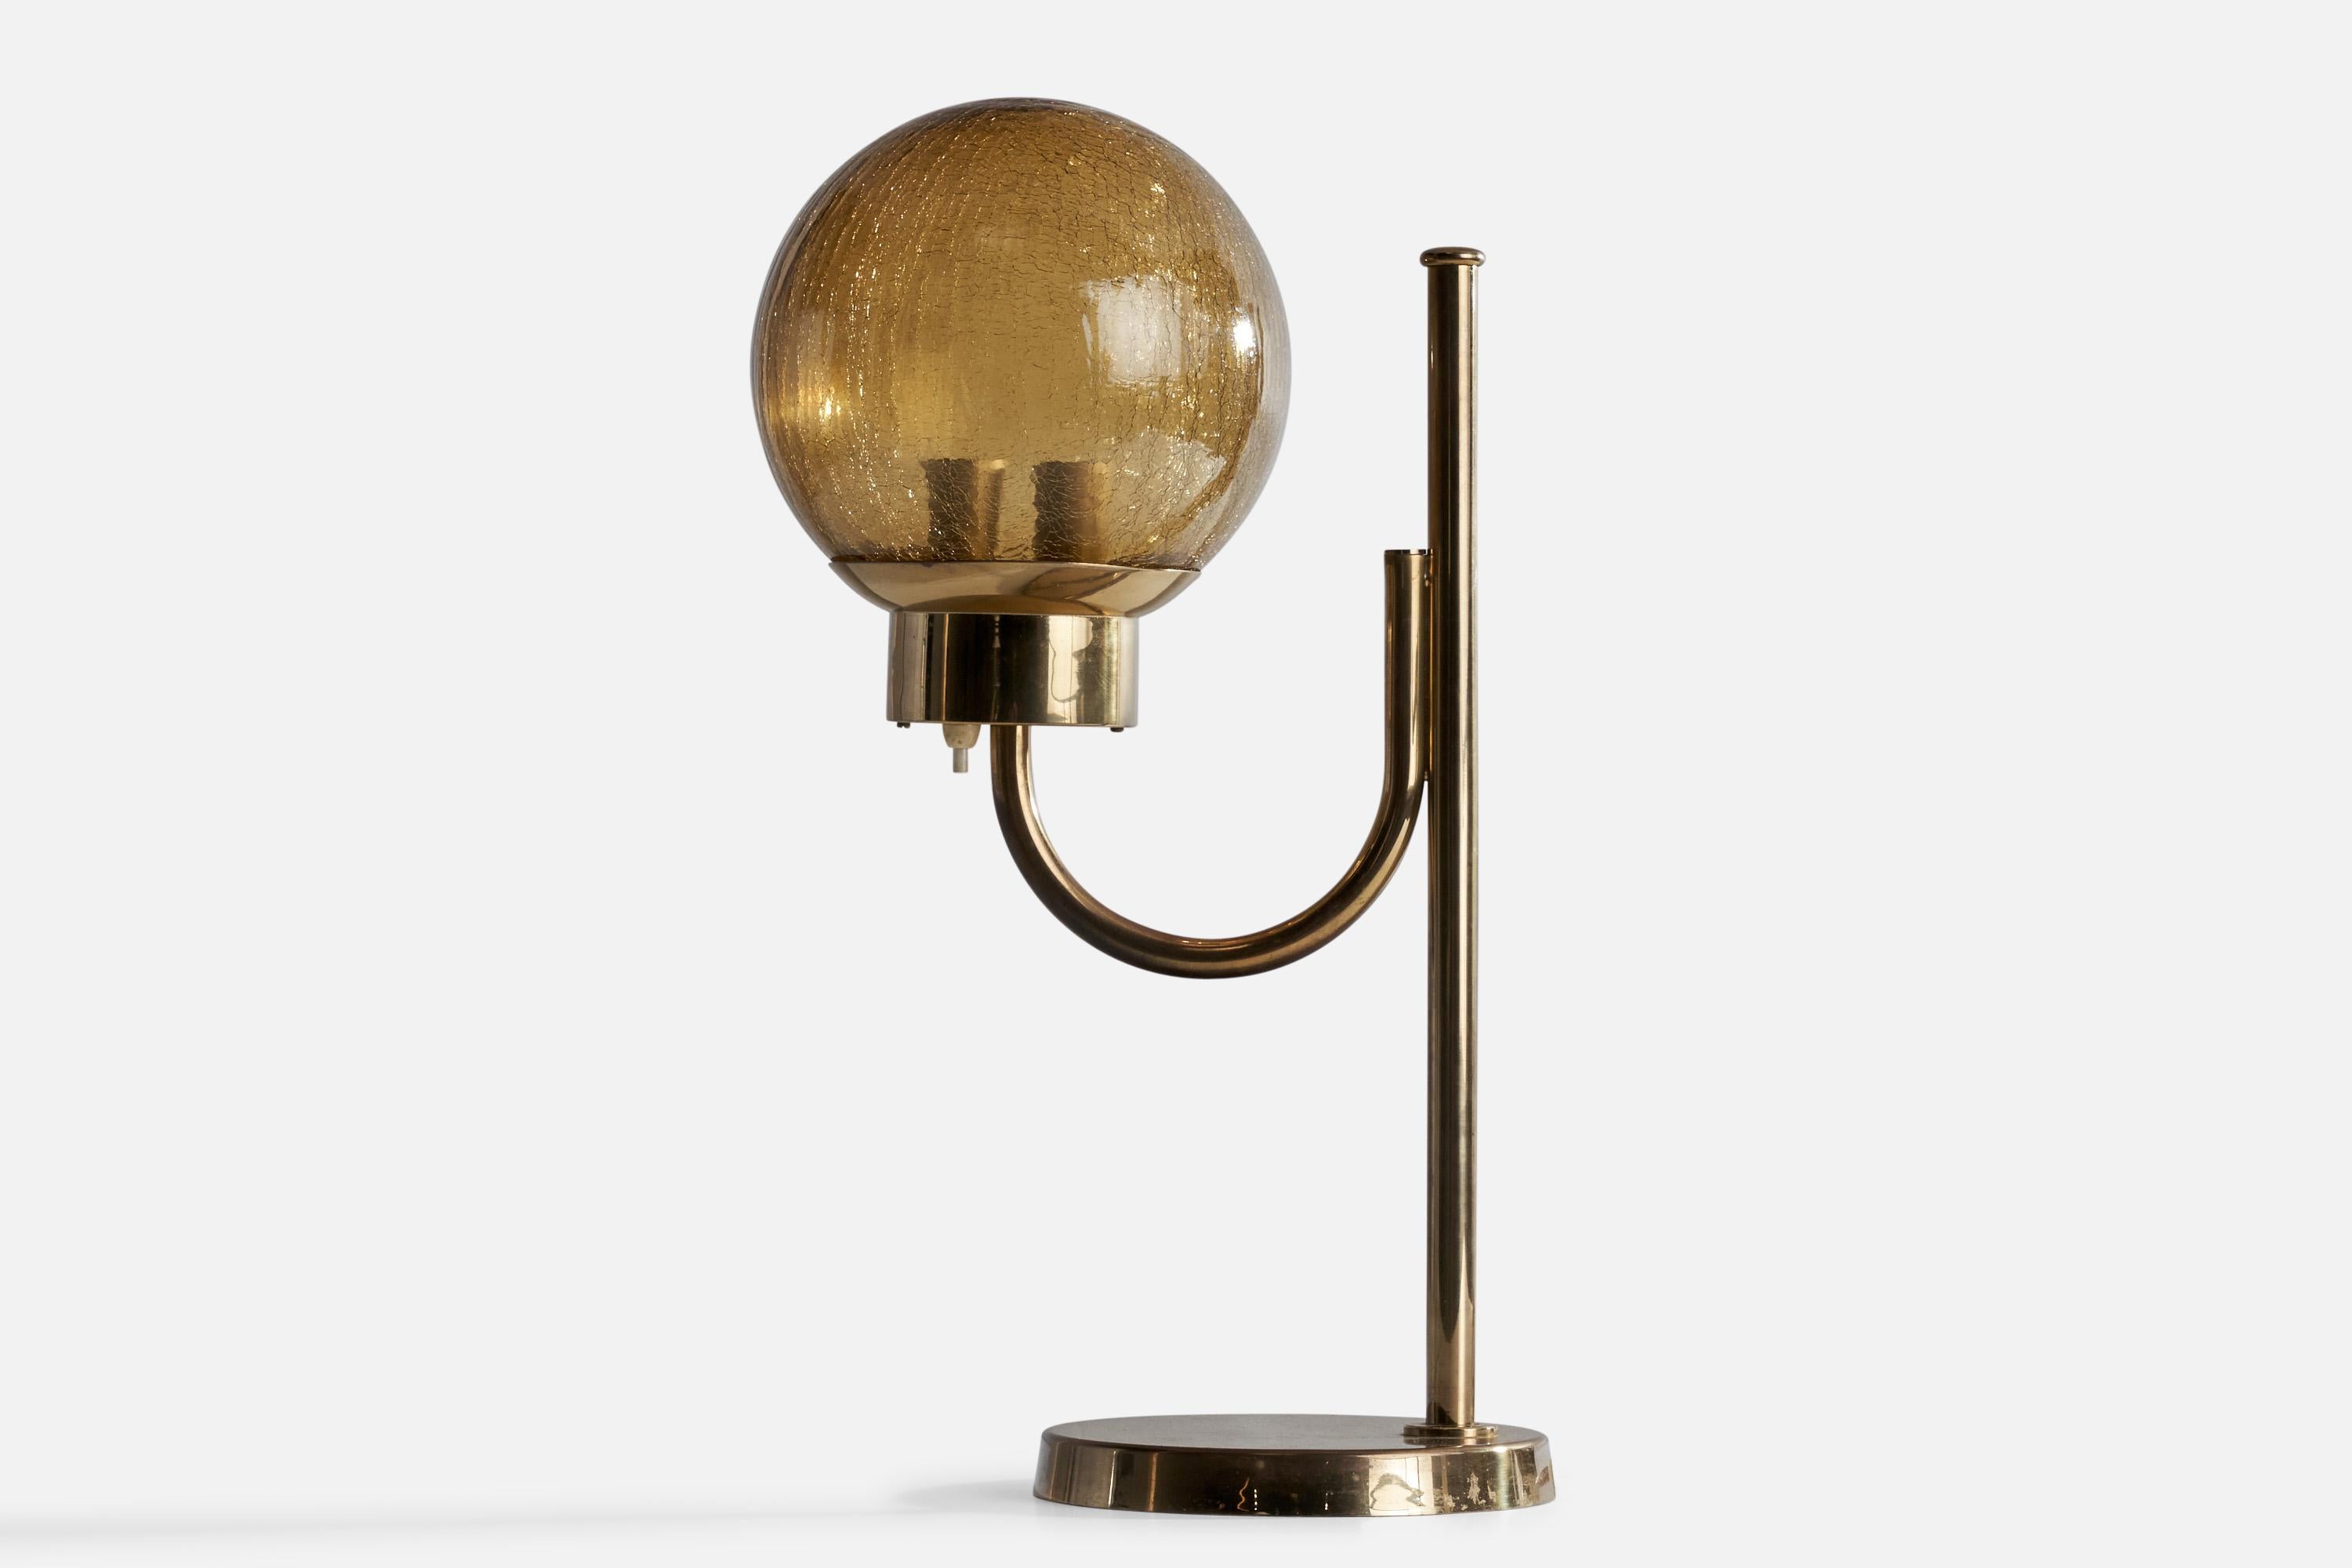 A brass and amber-colored blown glass table lamp designed and produced by Bergboms, Sweden, c. 1960s.

Overall Dimensions (inches): 17.72” H x 7.5” W x 11.25” D
Stated dimensions include shade.
Bulb Specifications: E-26 Bulb
Number of Sockets: 2
All